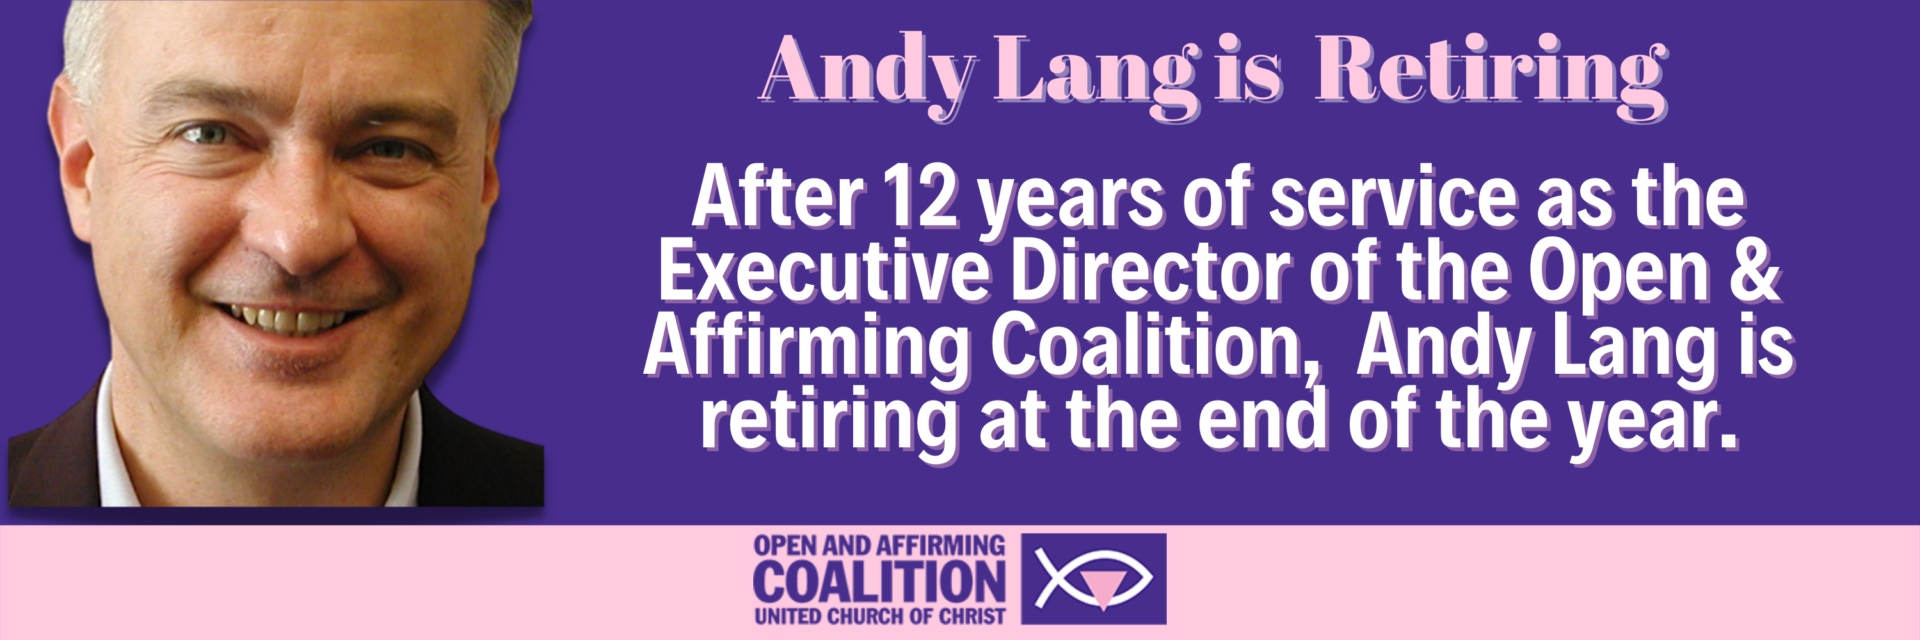 Andy Lang’s retirement